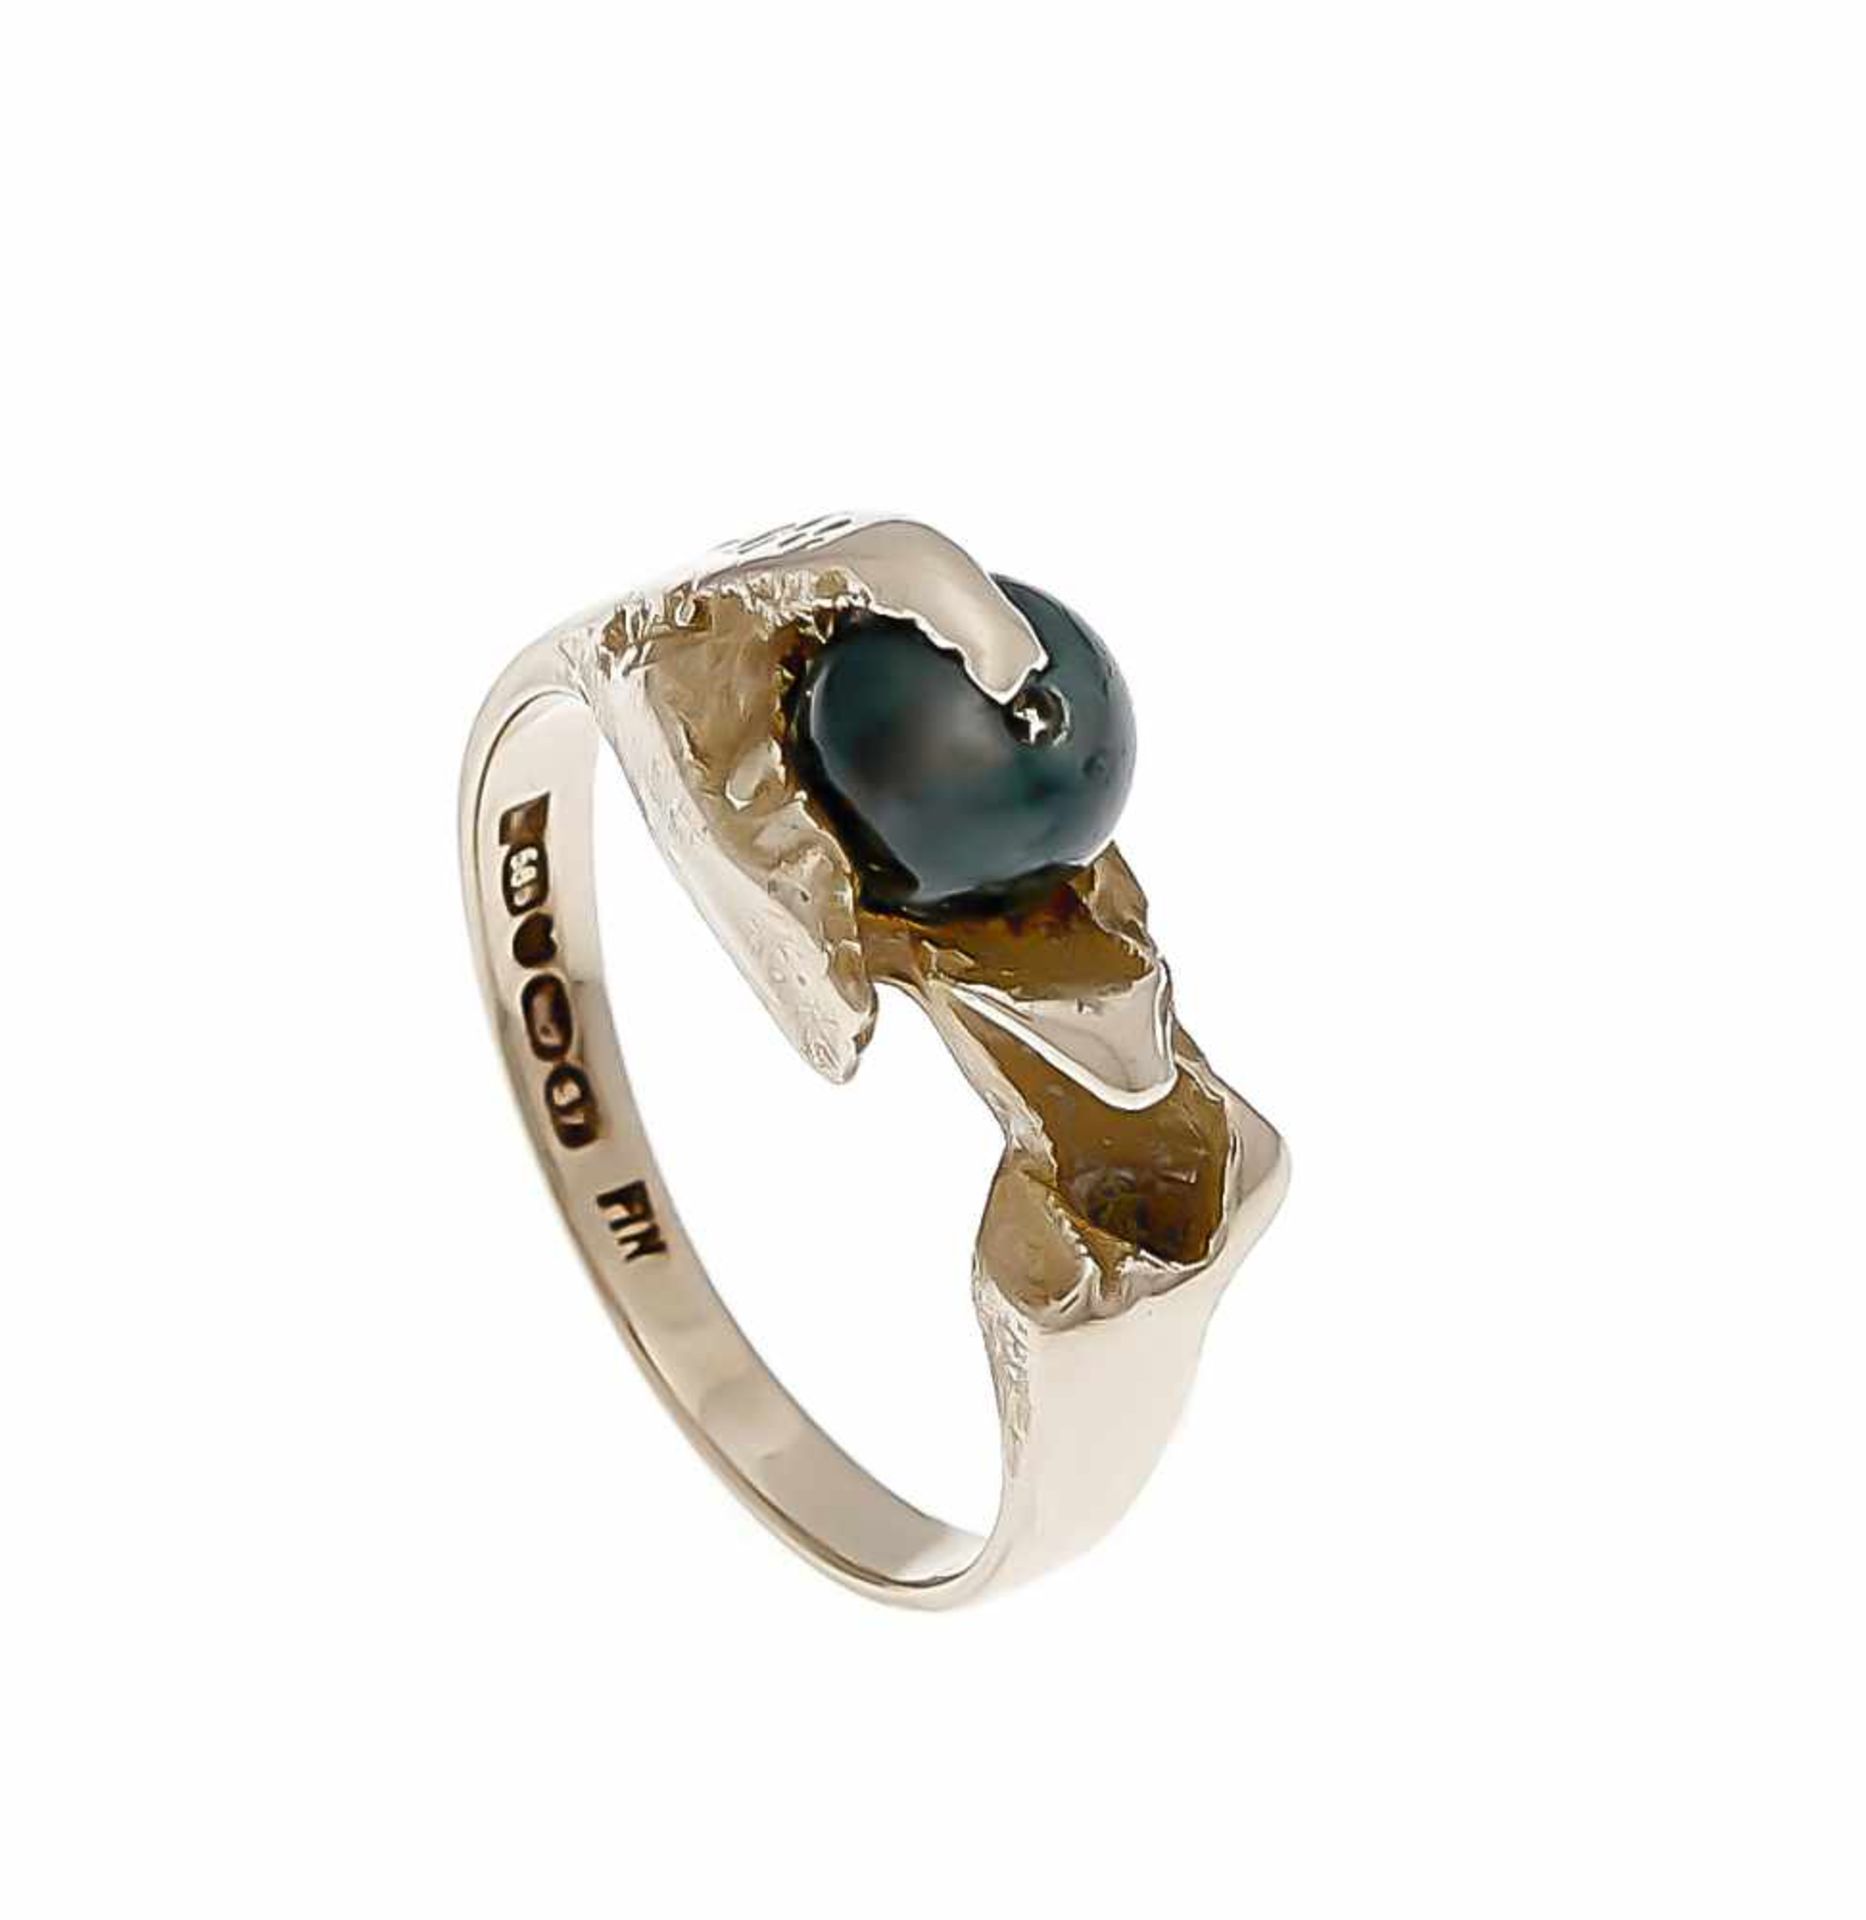 Lapponia ring GG 585/000 with a blue gemstone ball 6 mm, ring size 53, 4.1 g